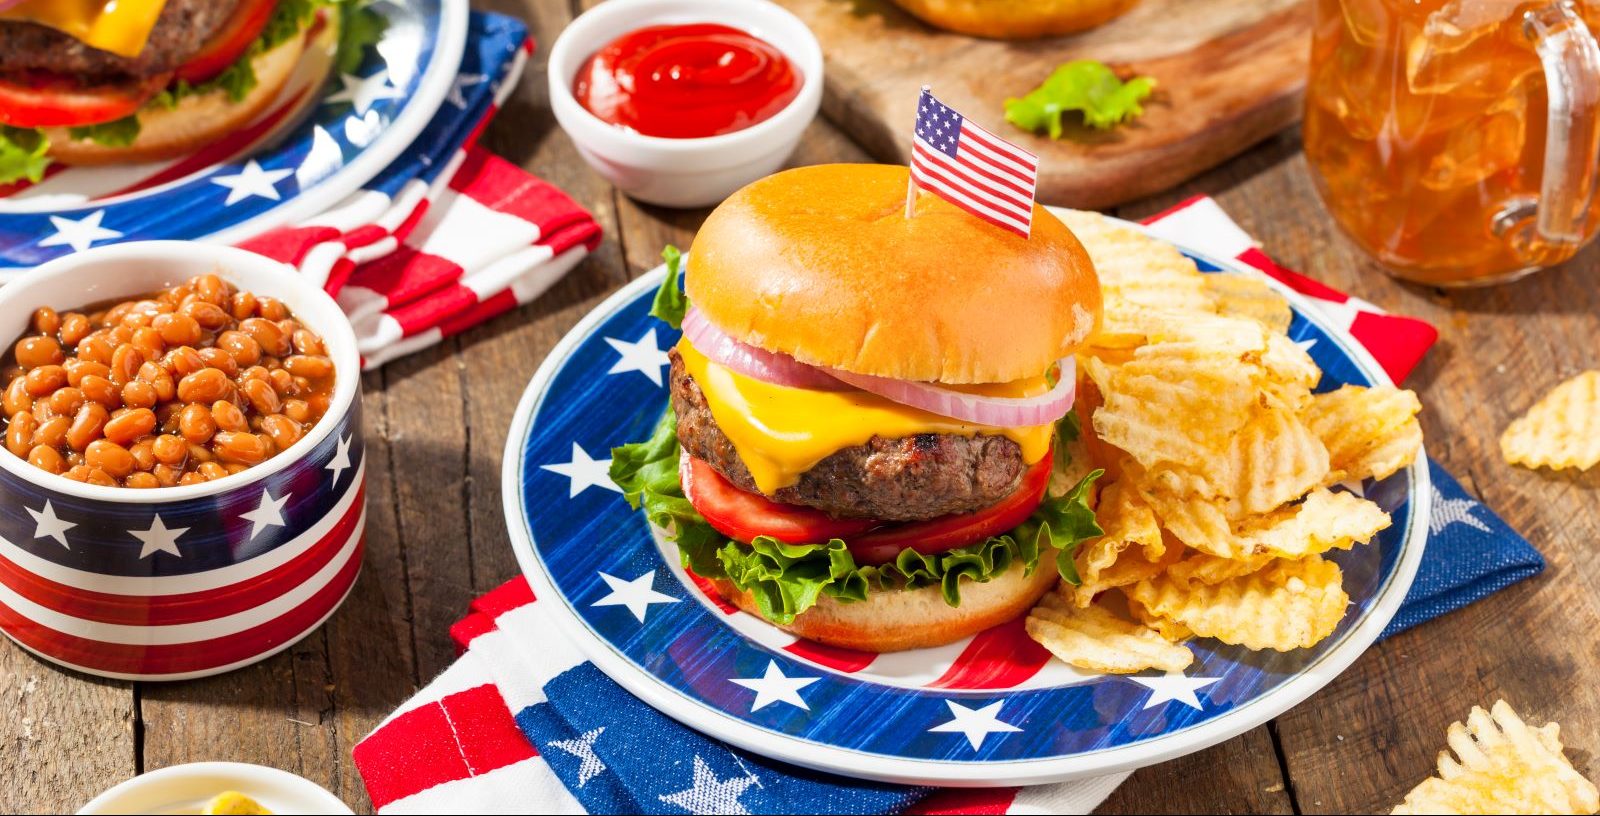 4 Practical Tips for a Guilt-Free Fourth of July